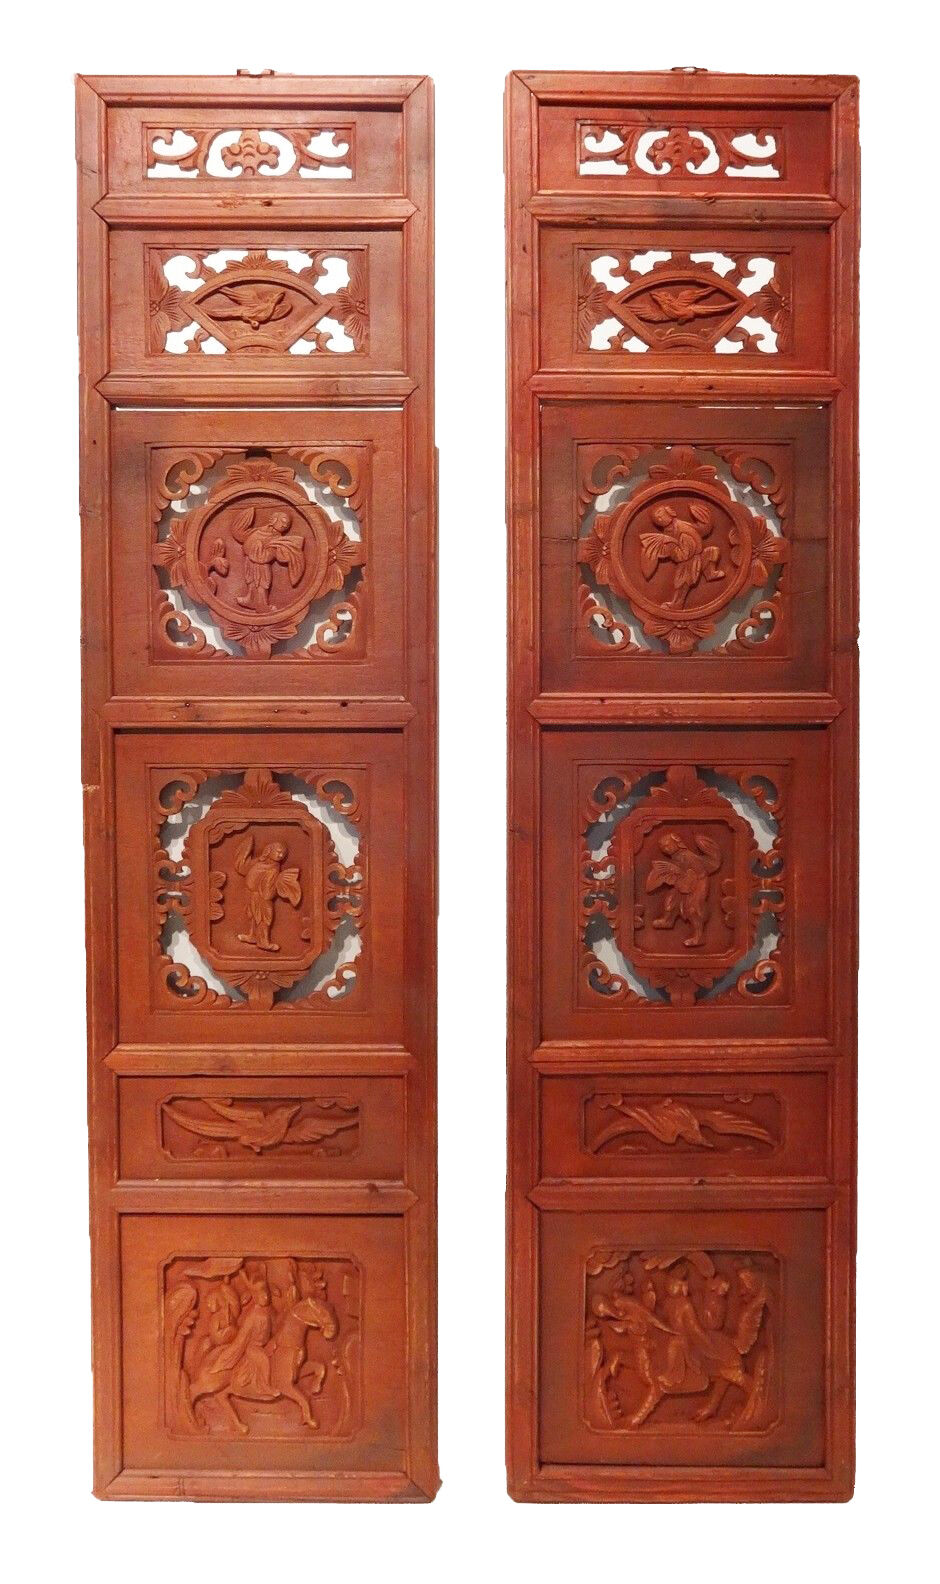 Superb Antique Carved Wood Chinese Wall Hangings/Shutters, Pair 54" h